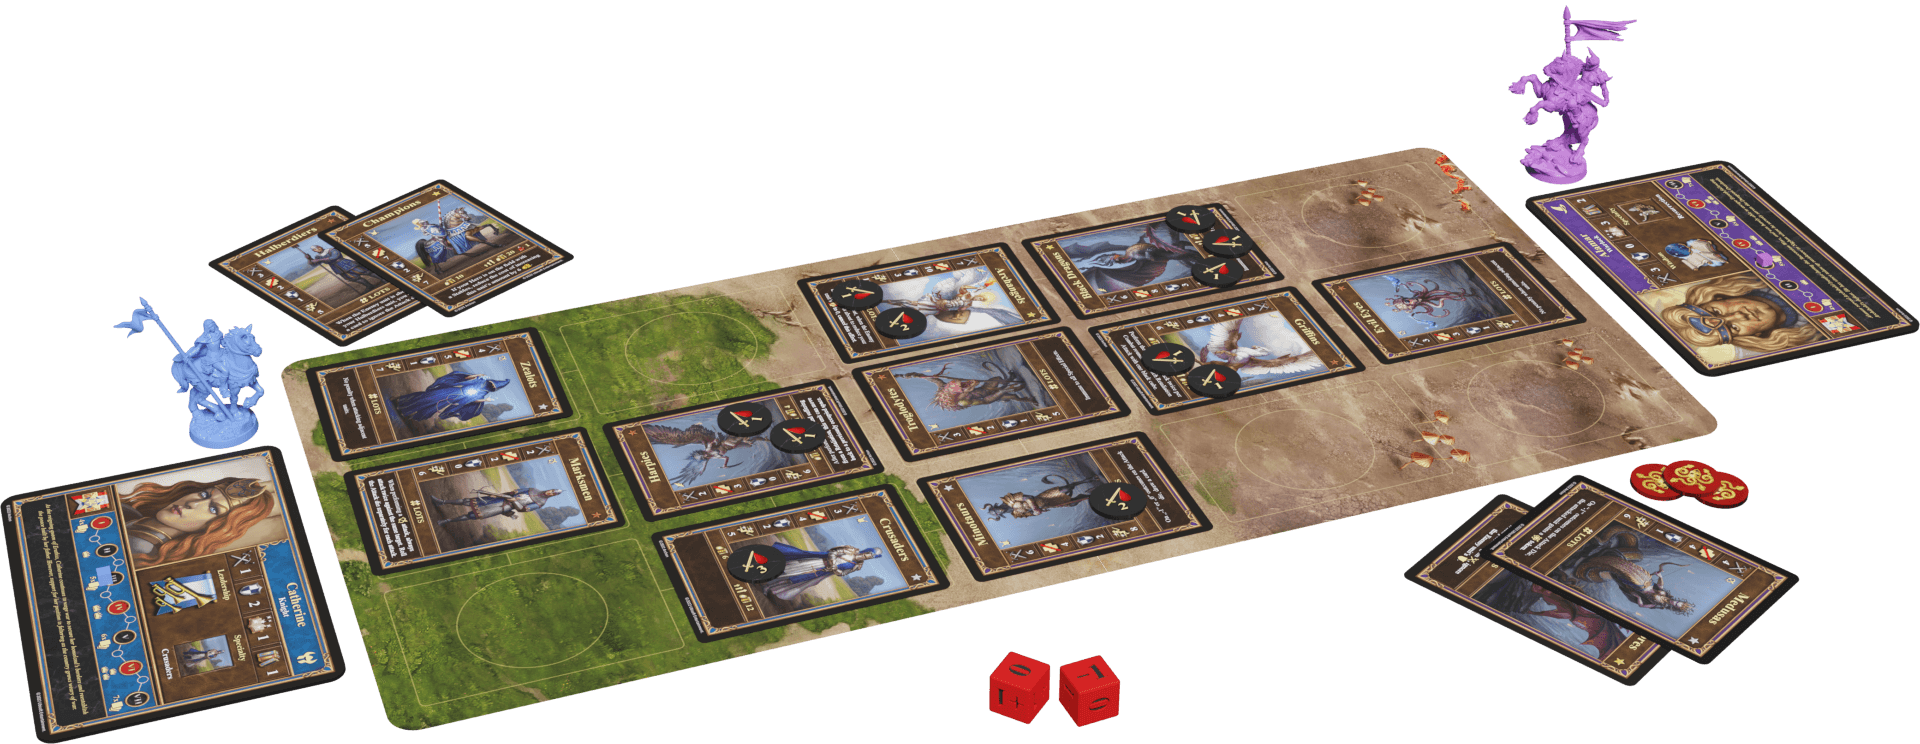 Homm3 board game without miniatures